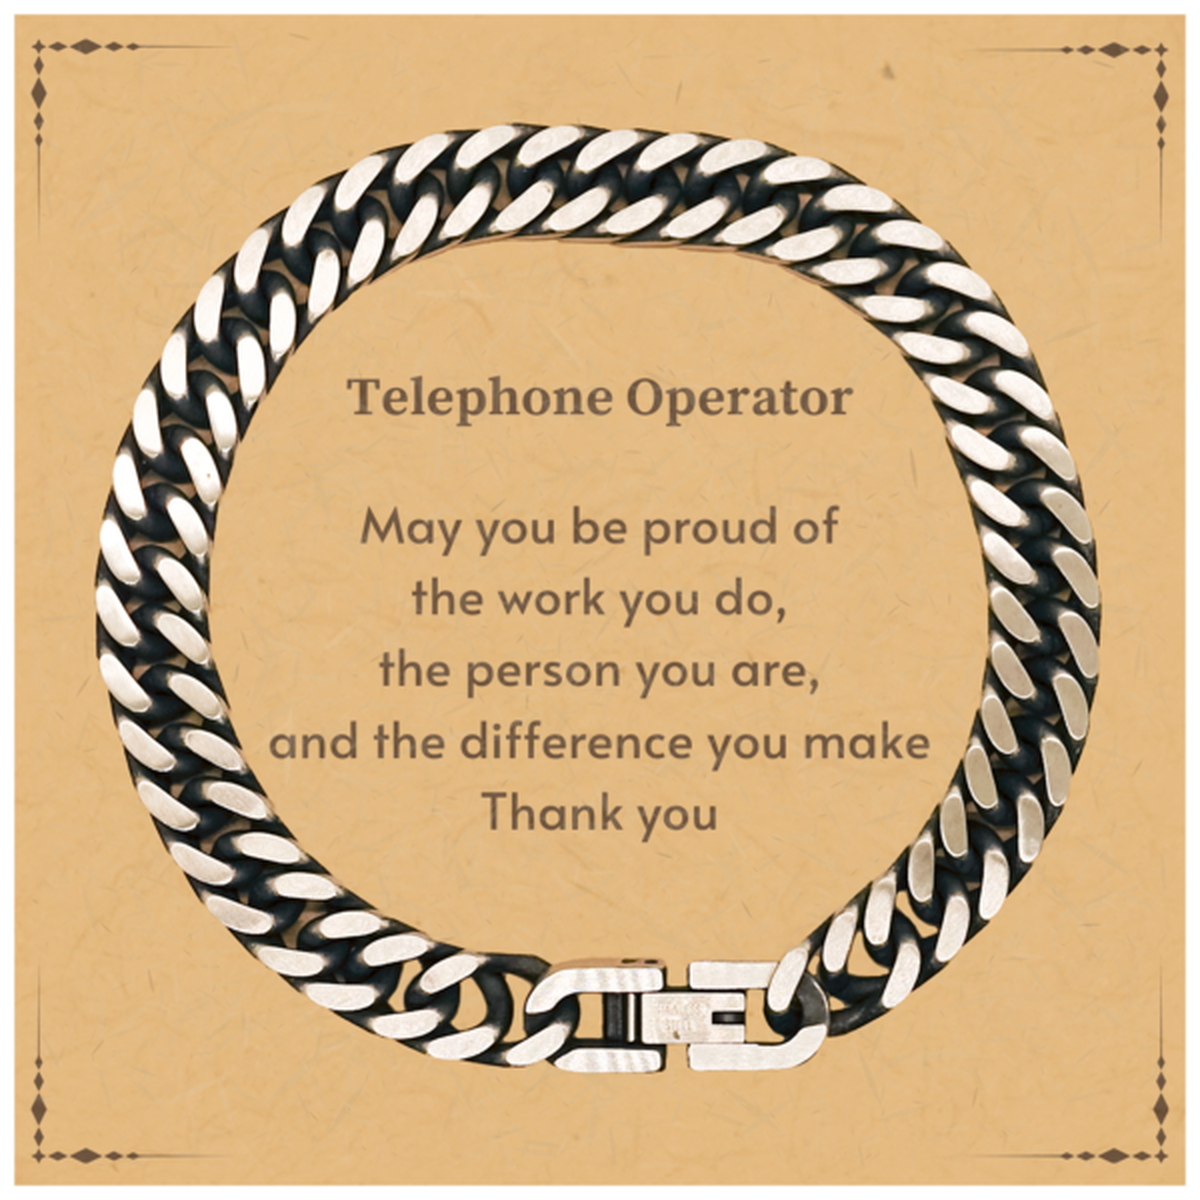 Heartwarming Cuban Link Chain Bracelet Retirement Coworkers Gifts for Telephone Operator, Telephone Operator May You be proud of the work you do, the person you are Gifts for Boss Men Women Friends